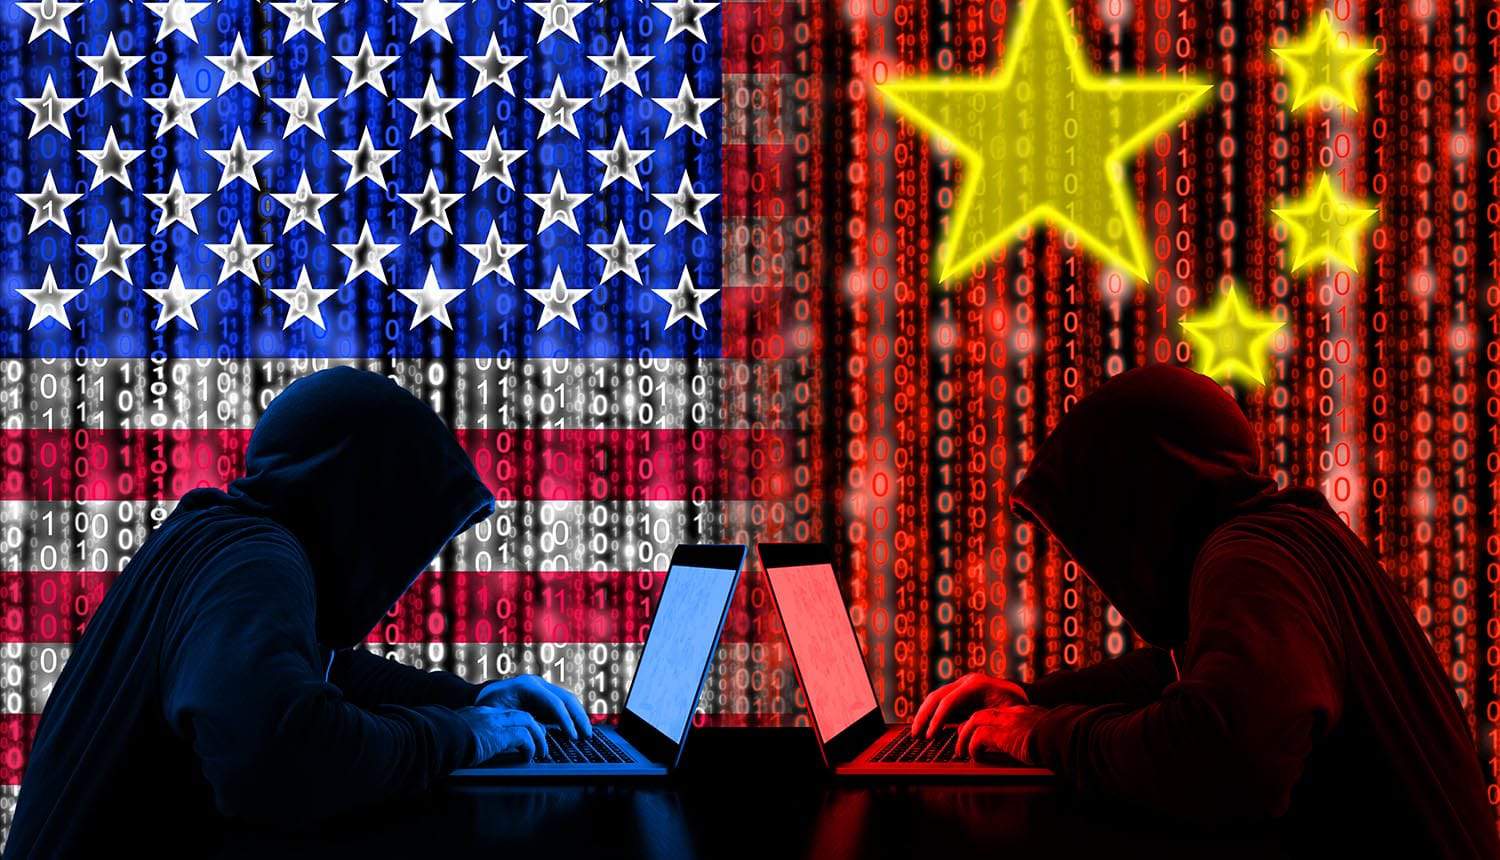 The Persistent Threat of Chinese Cyber Espionage Against the United States